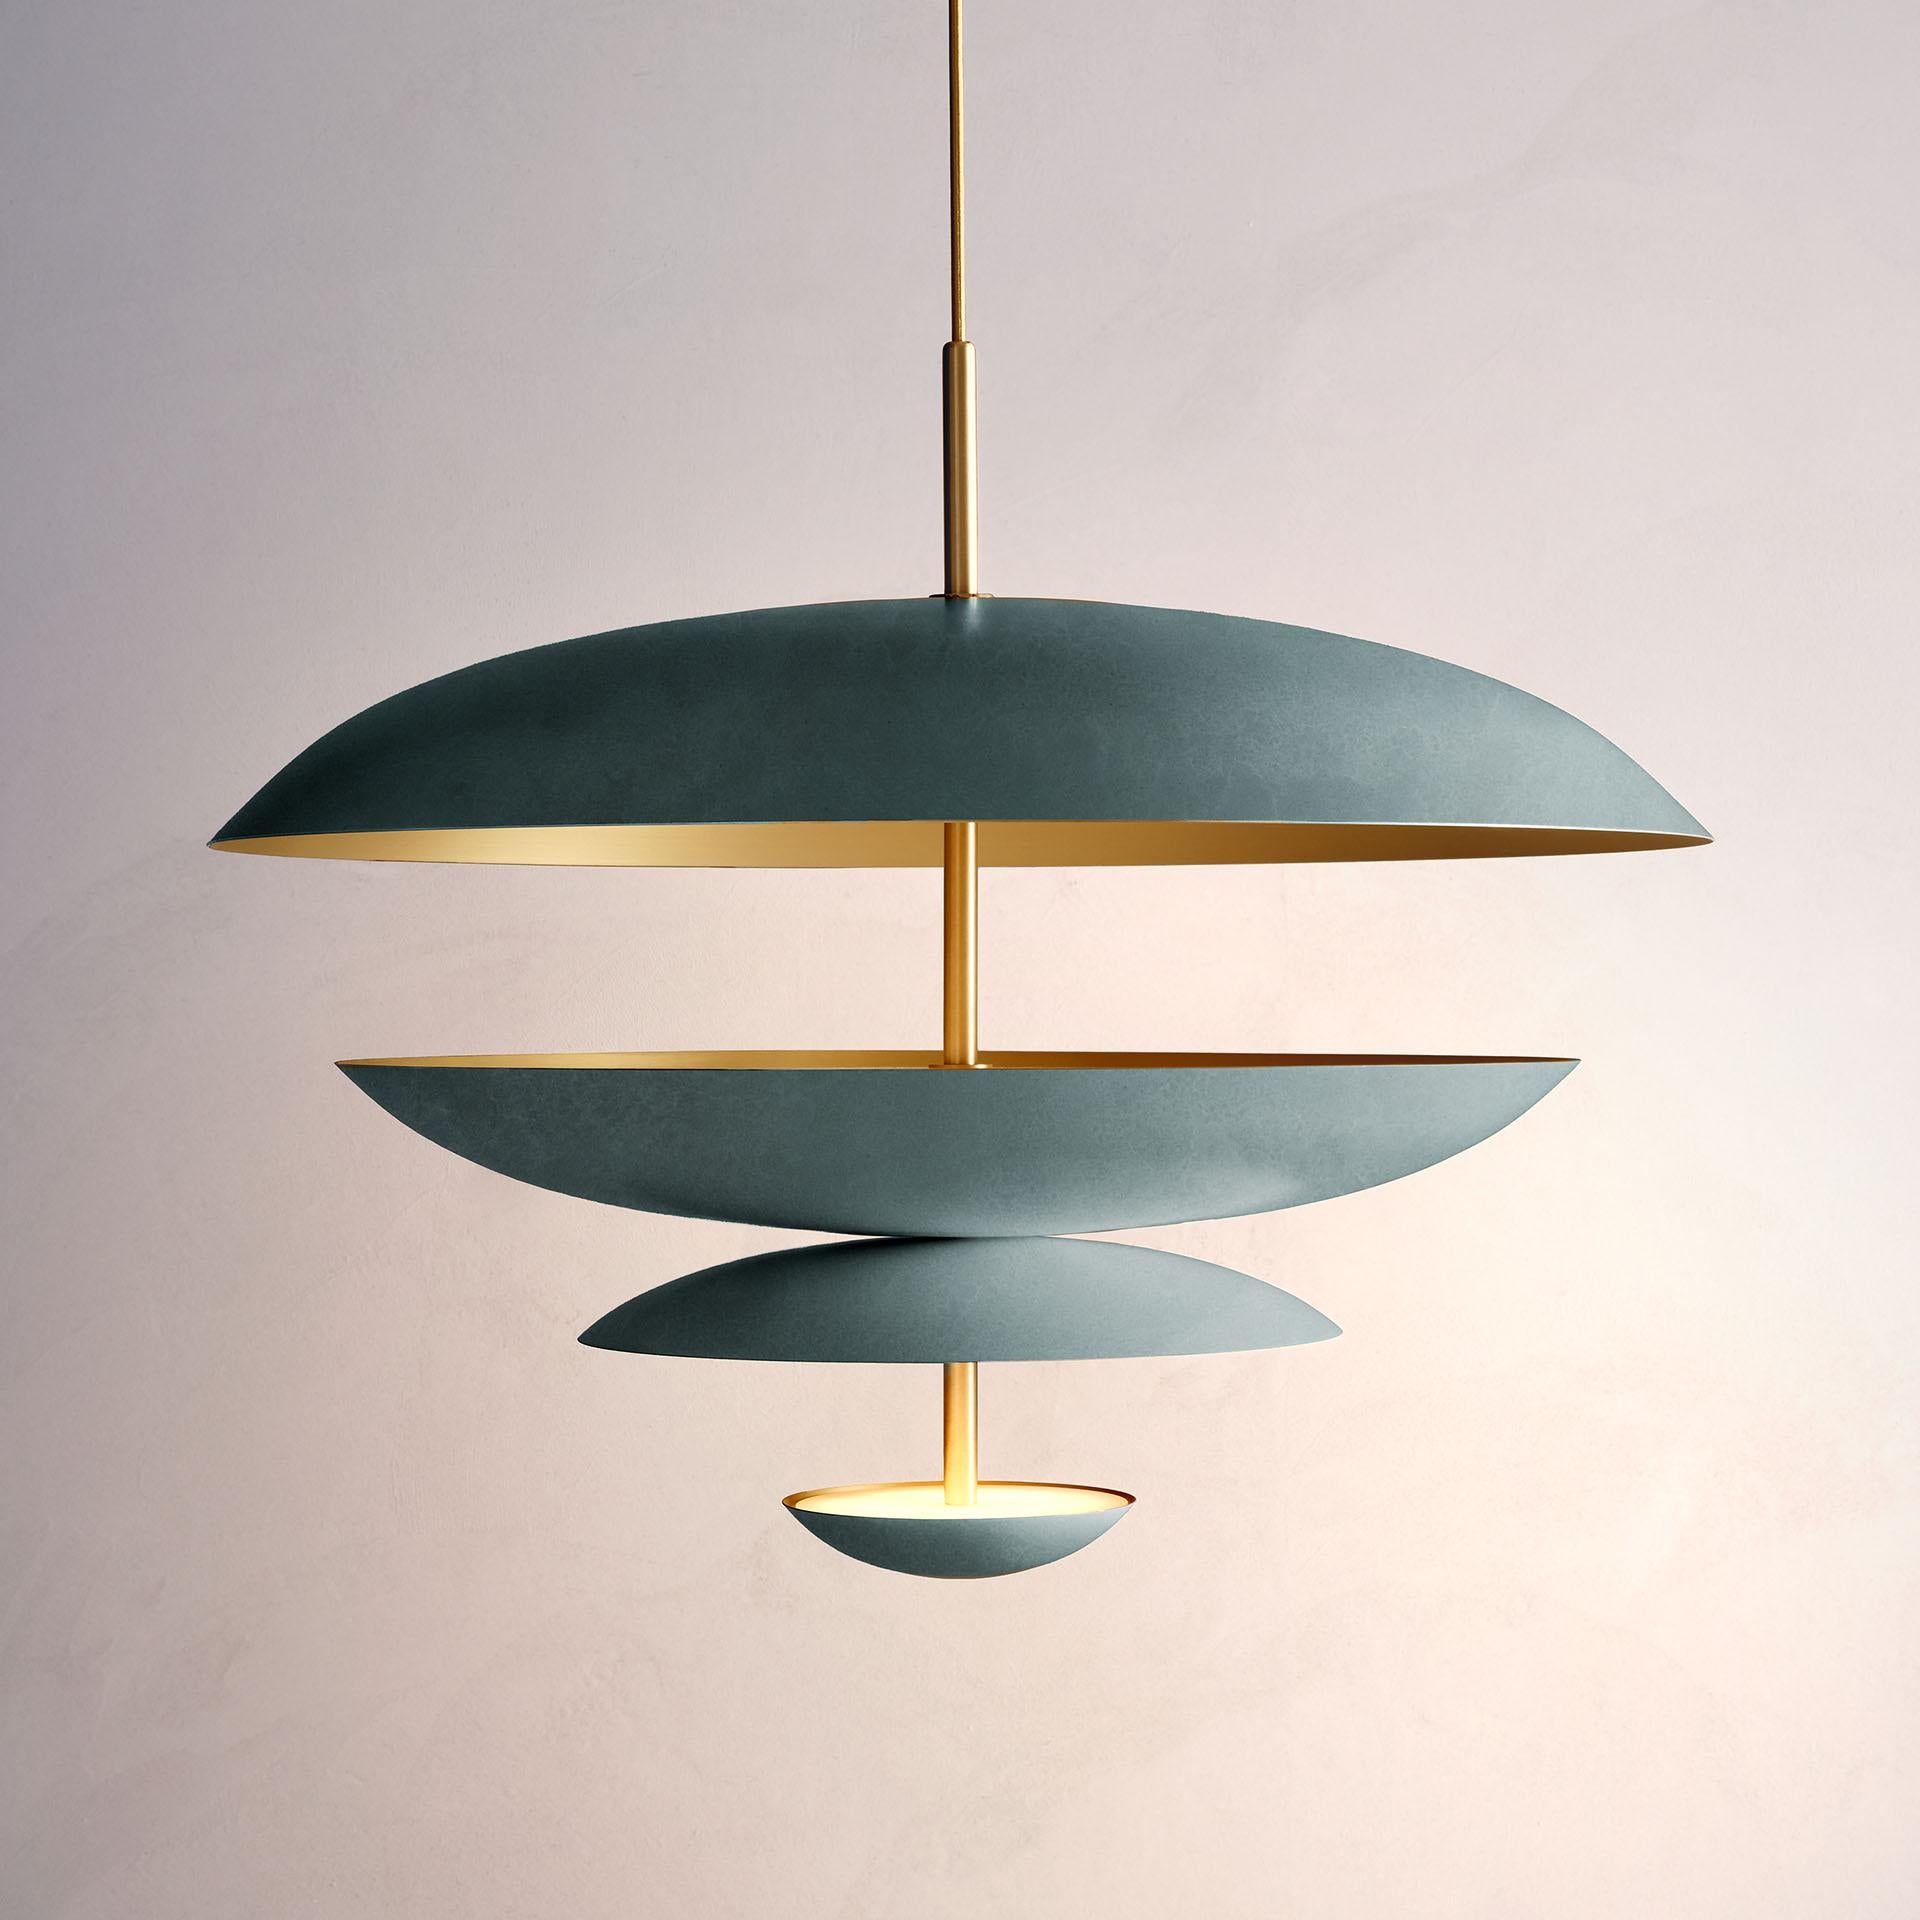 Composed by four finely hand-spun brass plates, this chandelier is finished in a verdigris patina on one side and satin brushed brass on the other to reveal the bright texture of brass. Light is projected into the shade before reflecting out,